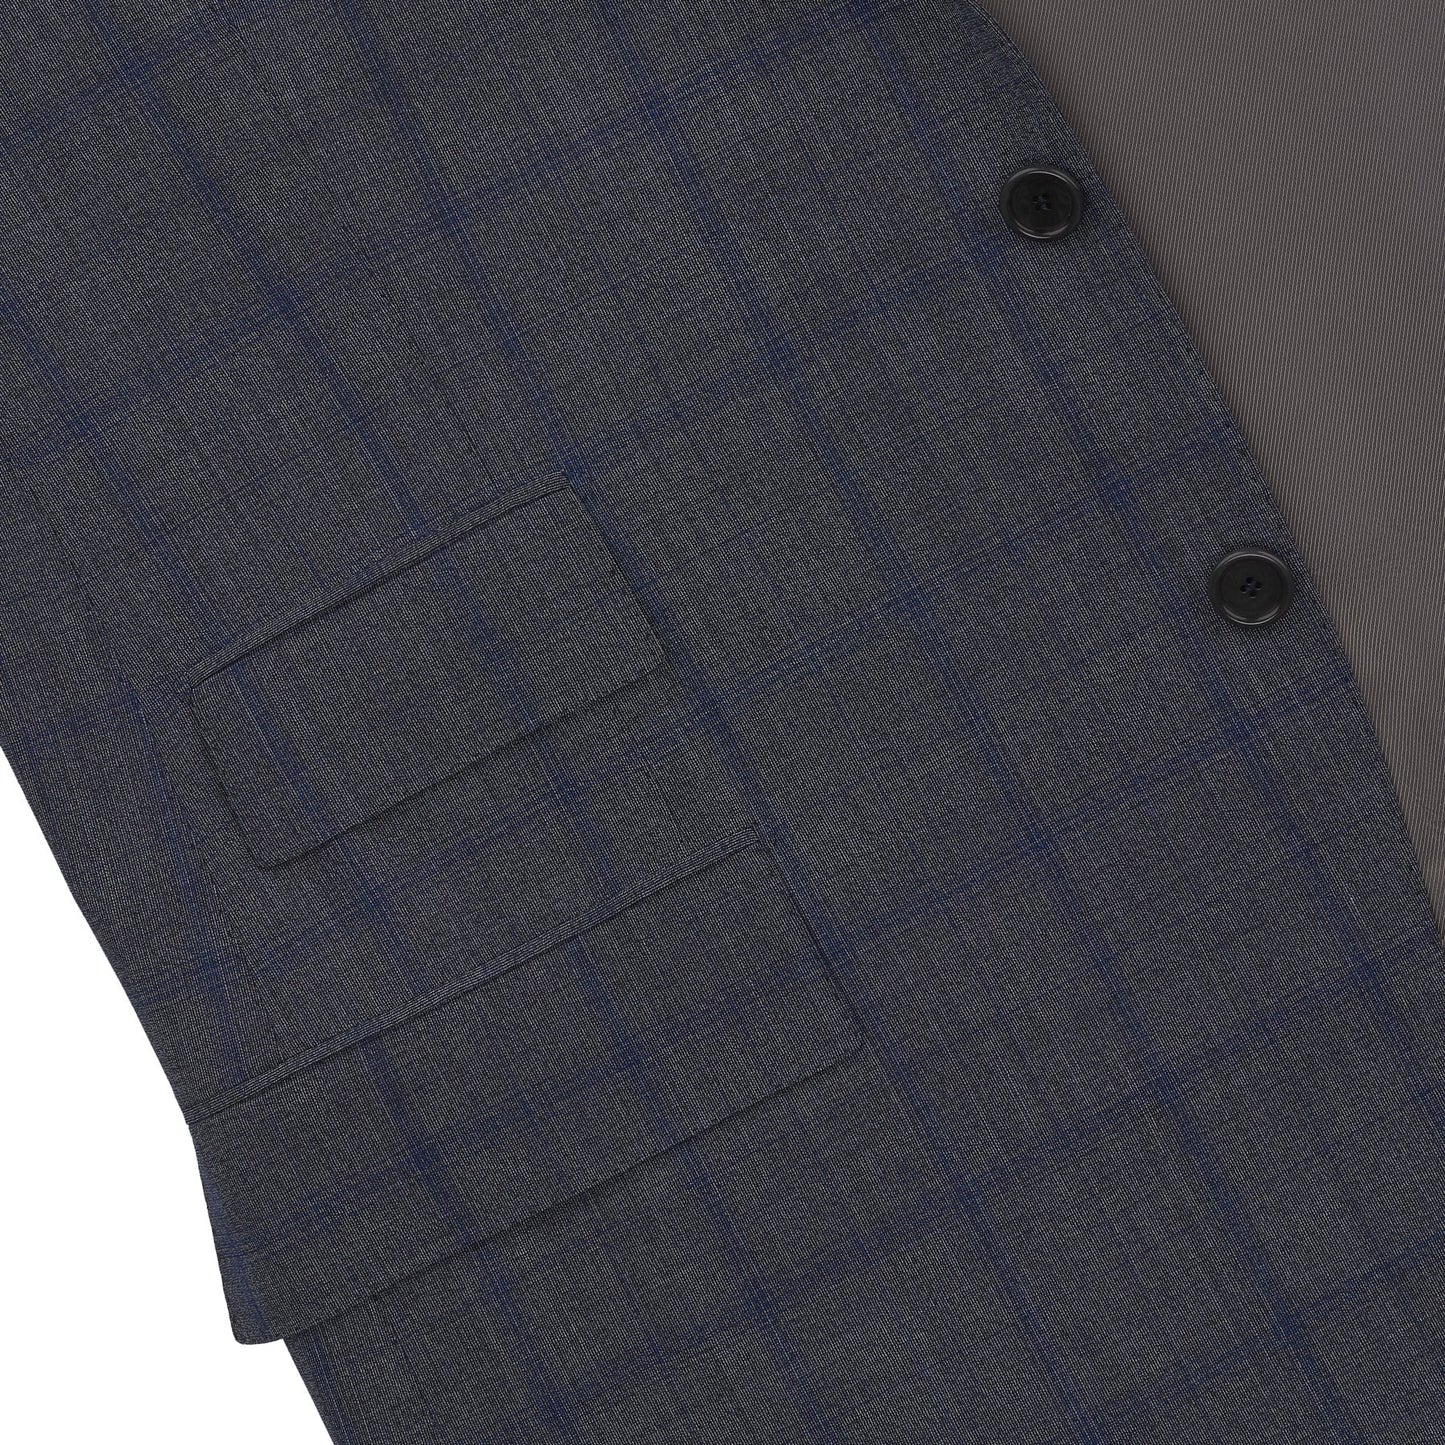 Cesare Attolini Single-Breasted Plaid-Check Wool Suit in Grey - SARTALE